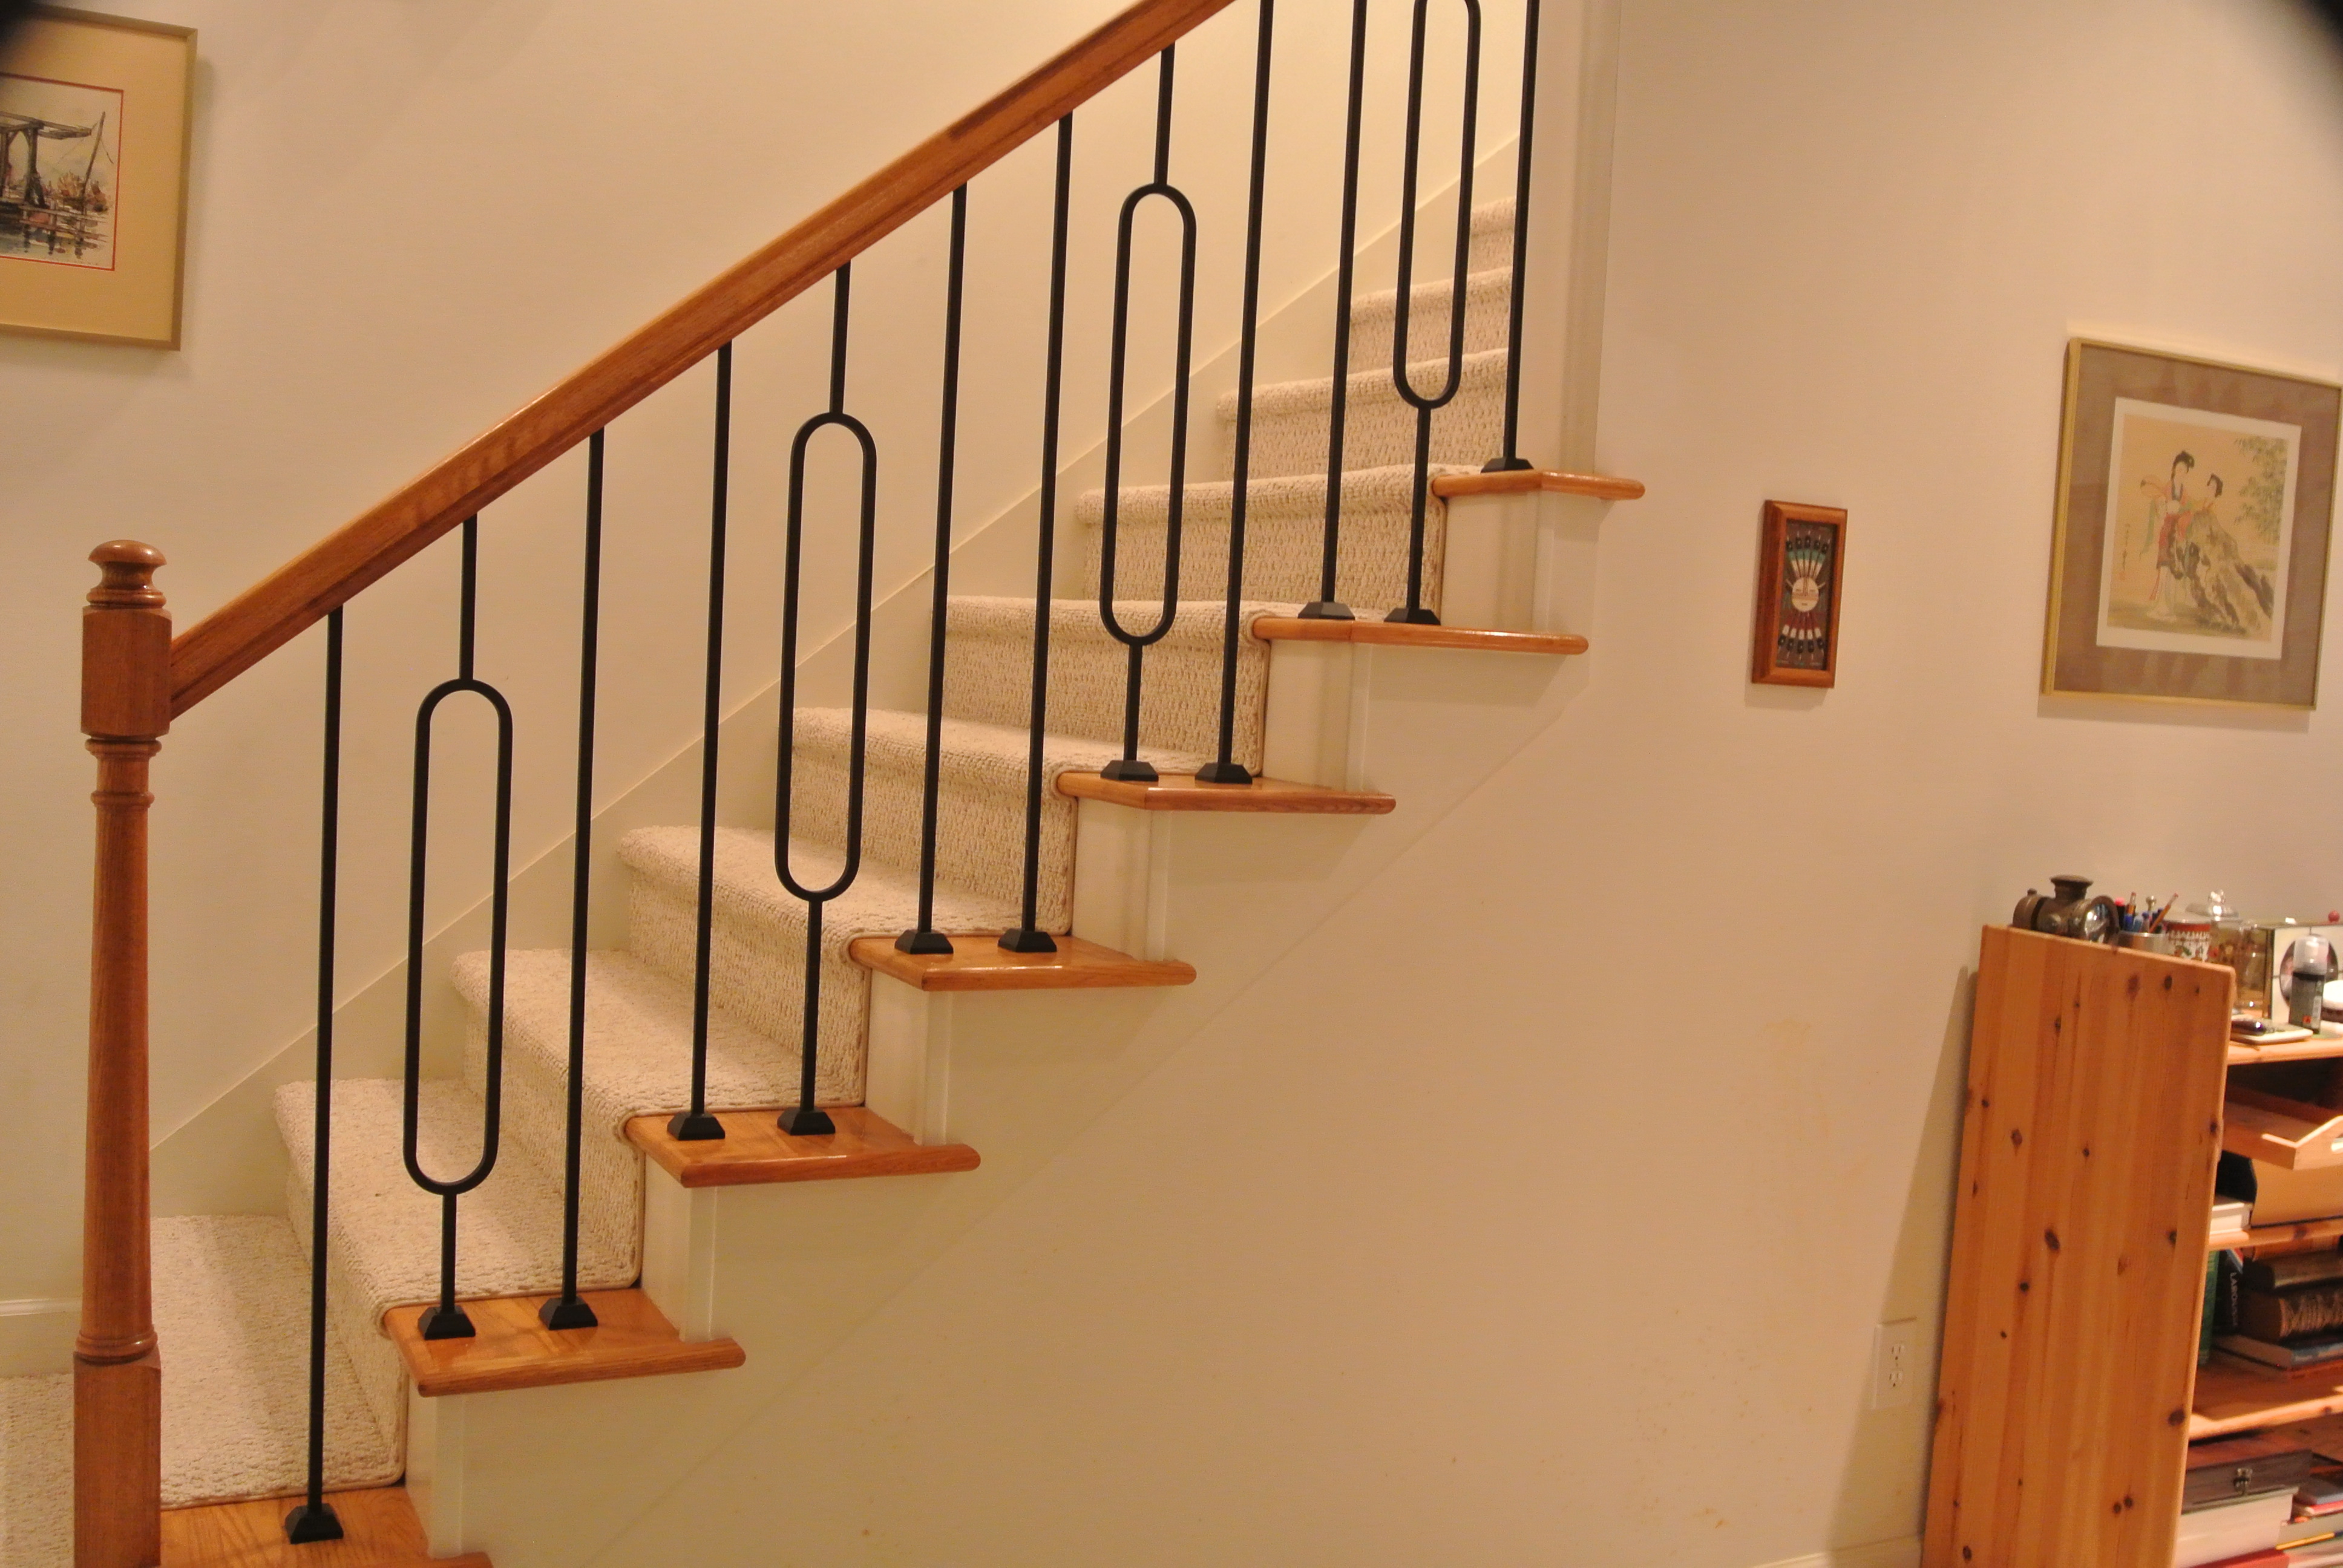 Myriam Cousin Staircase with HF16.6.2 Oval Balusters